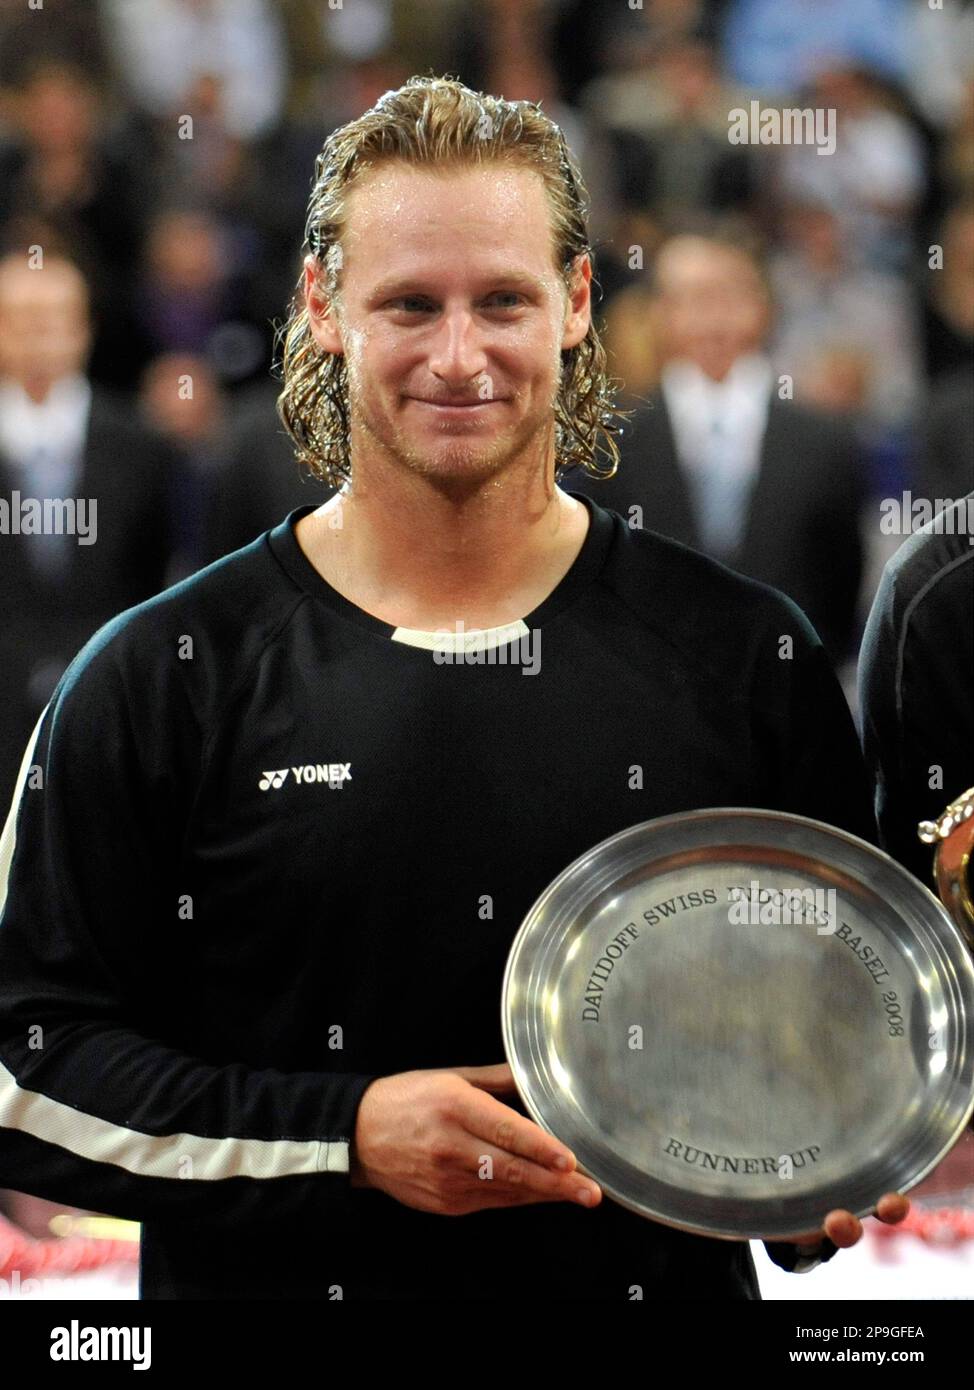 Argentina's David Nalbandian presents his trophy after the final match  against Switzerland's Roger Federer at the Davidoff Swiss Indoors tennis  tournament in Basel, Switzerland, Sunday, Oct. 26, 2008. (AP  photo/Keystone/Georgios Kefalas Stock